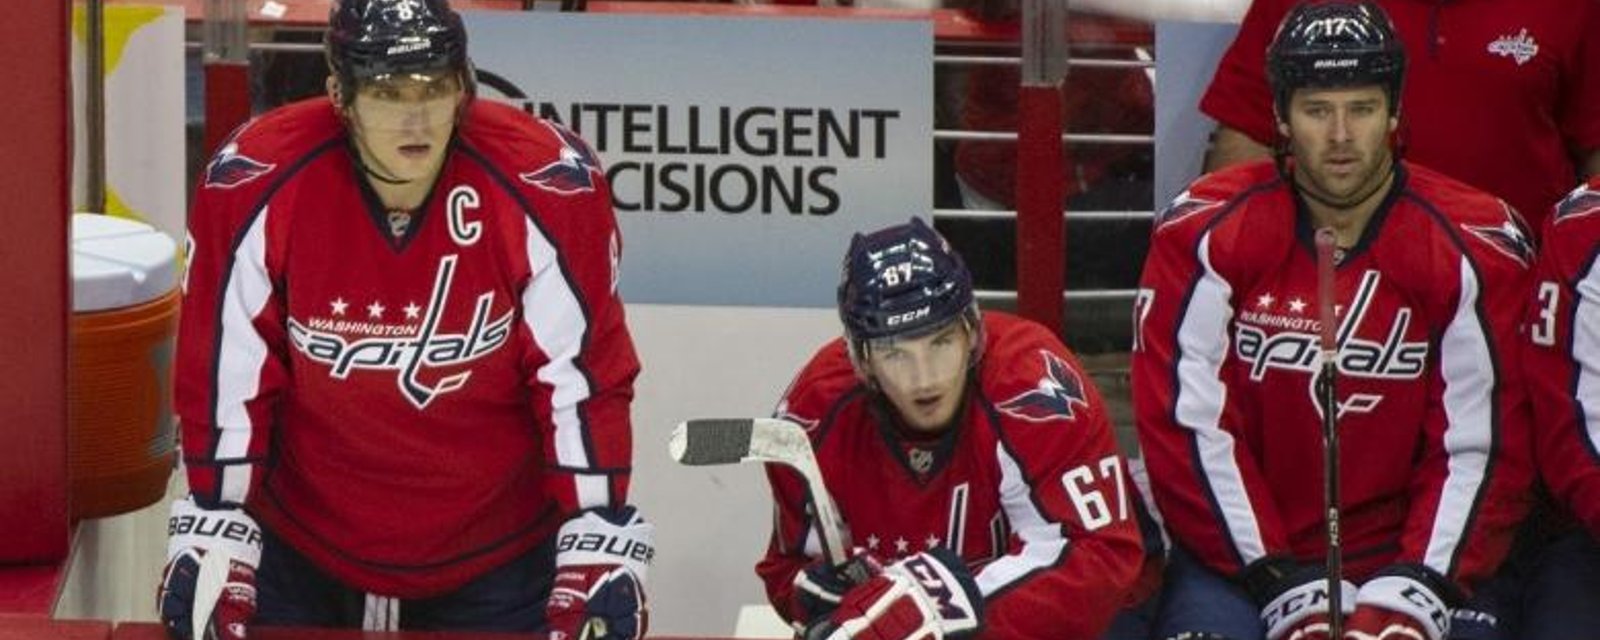 Ovechkin defends dangerous hit that sent opponent to hospital.